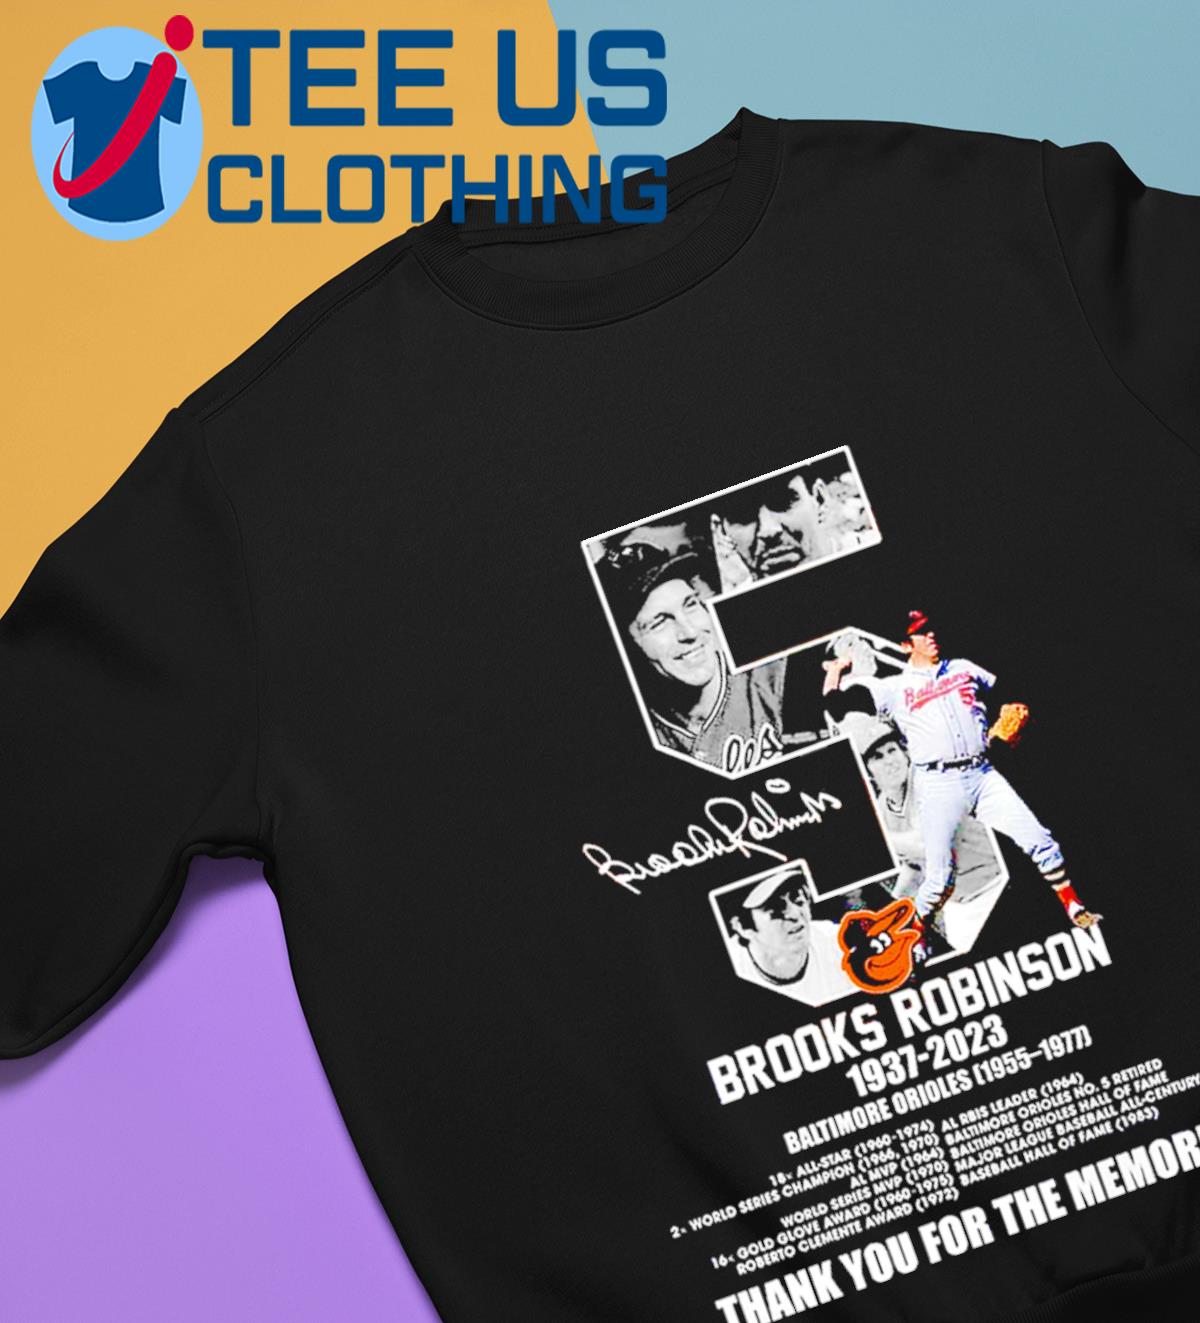 Official brooks Robinson Maltimore Orioles 1955 1977 Thank You For The  Memories Shirt, hoodie, sweater, long sleeve and tank top